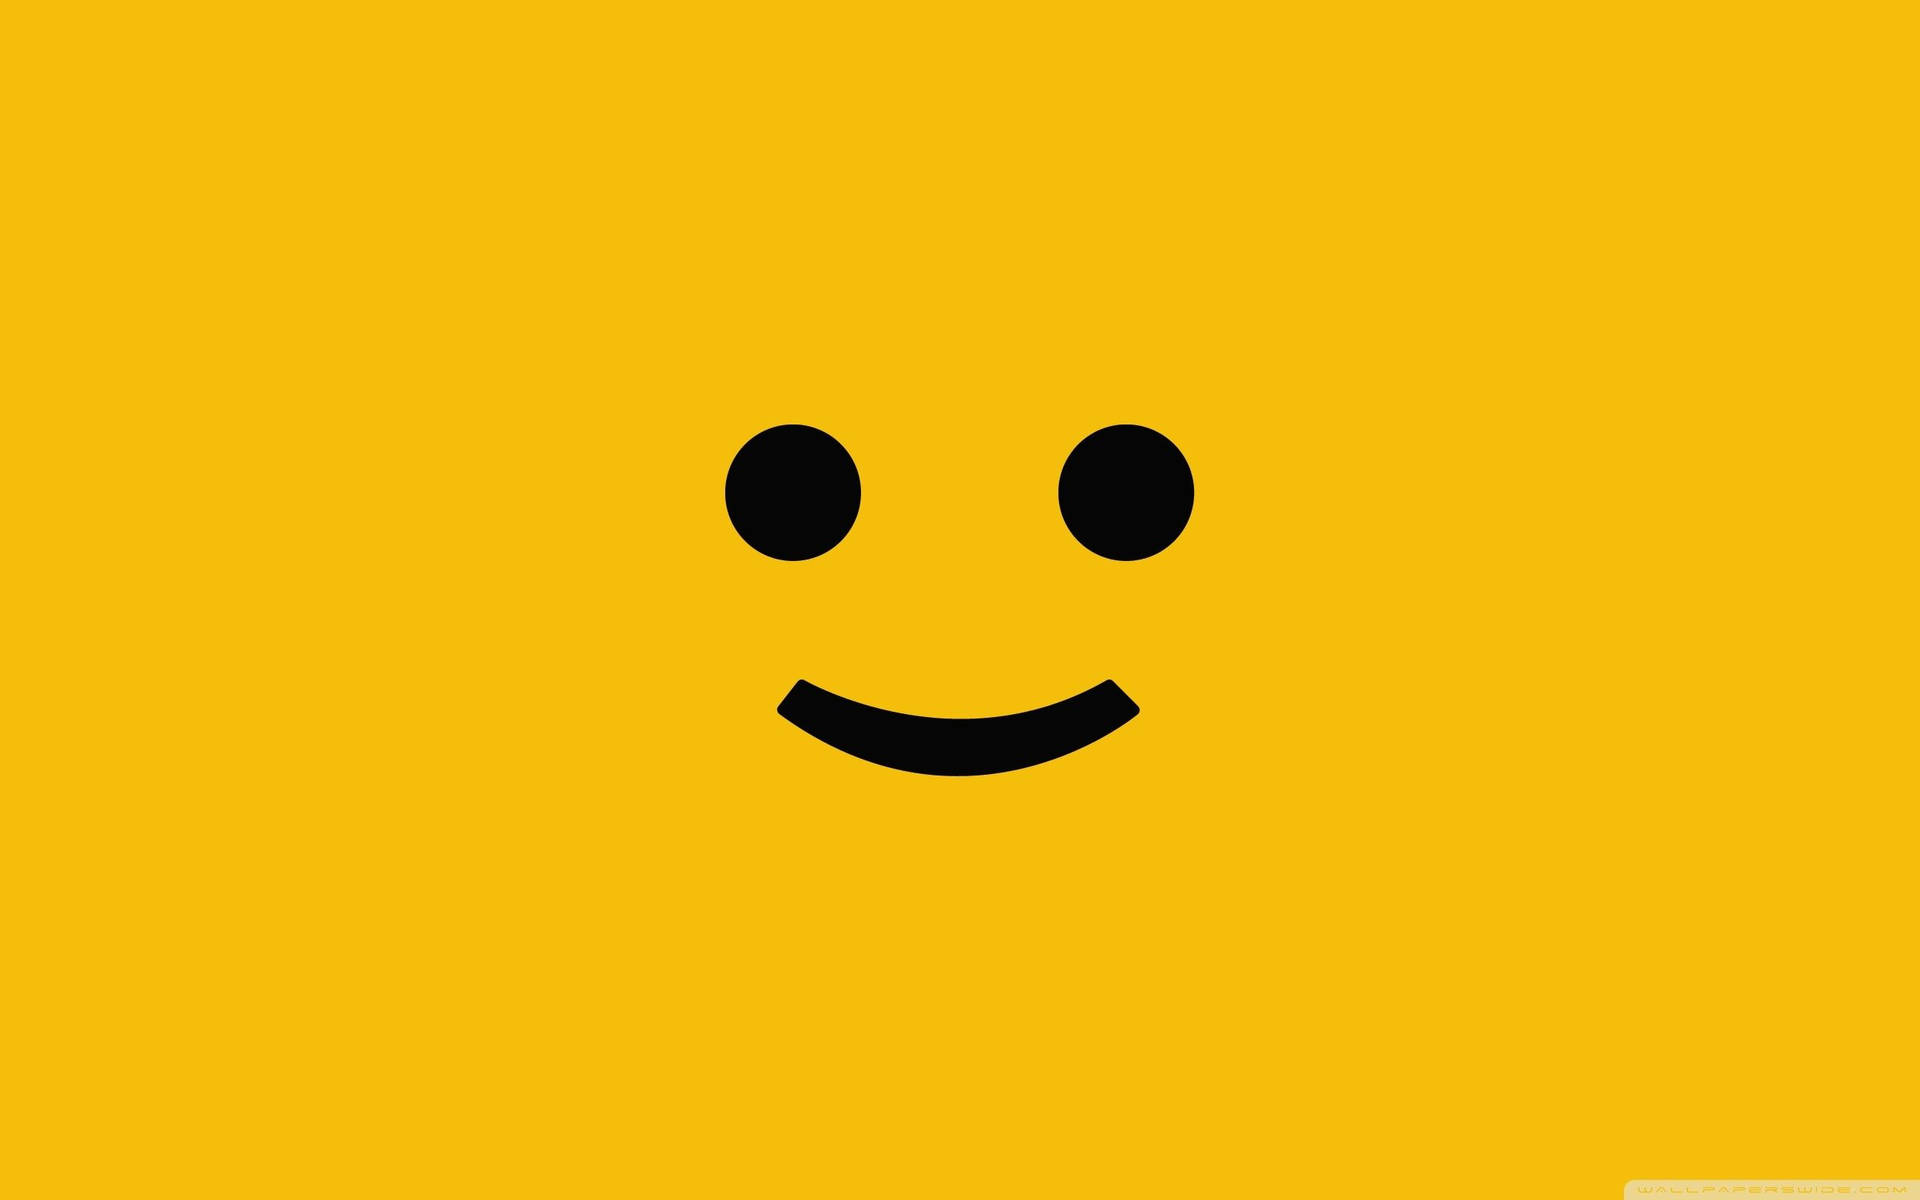 Smiley Face Iconic Yellow Background